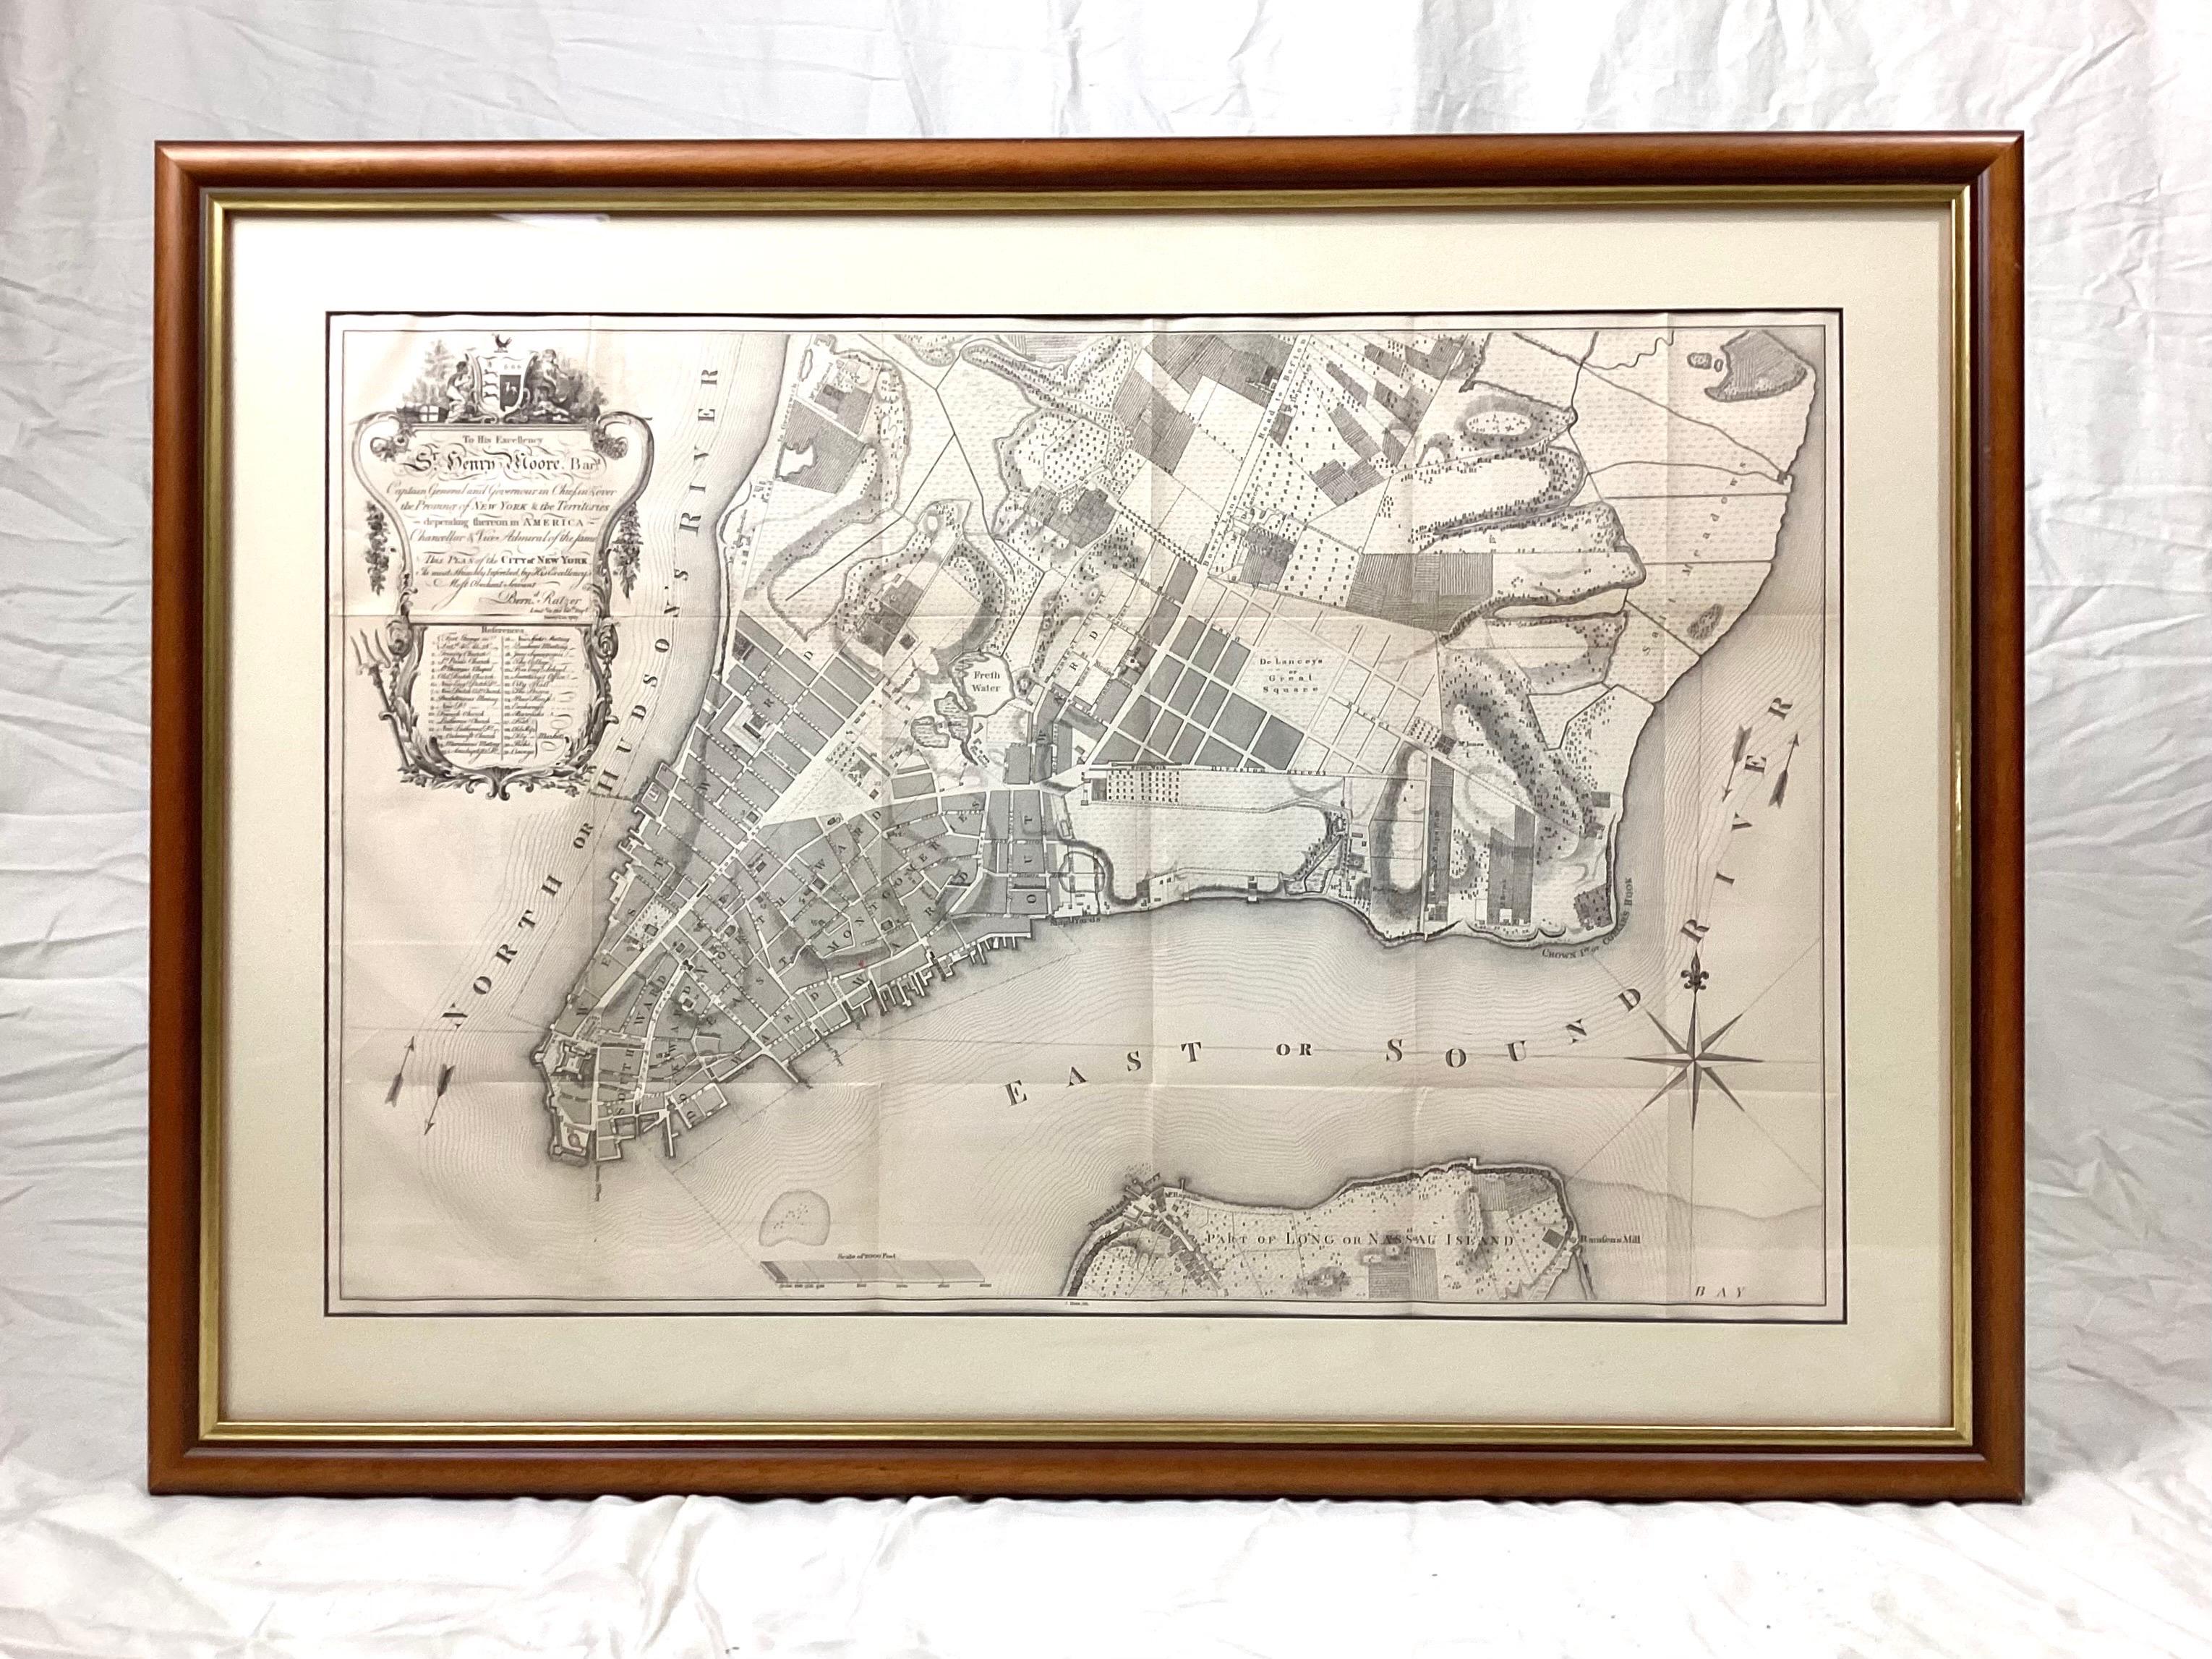 Old framed map of a plan of the City of New York as surveyed in 1767. Published by the Common Council and 
lithographed by George Hayward circa 1800. Reproduced from the original vintage map late 1800s early 1900s. Overall Size 33